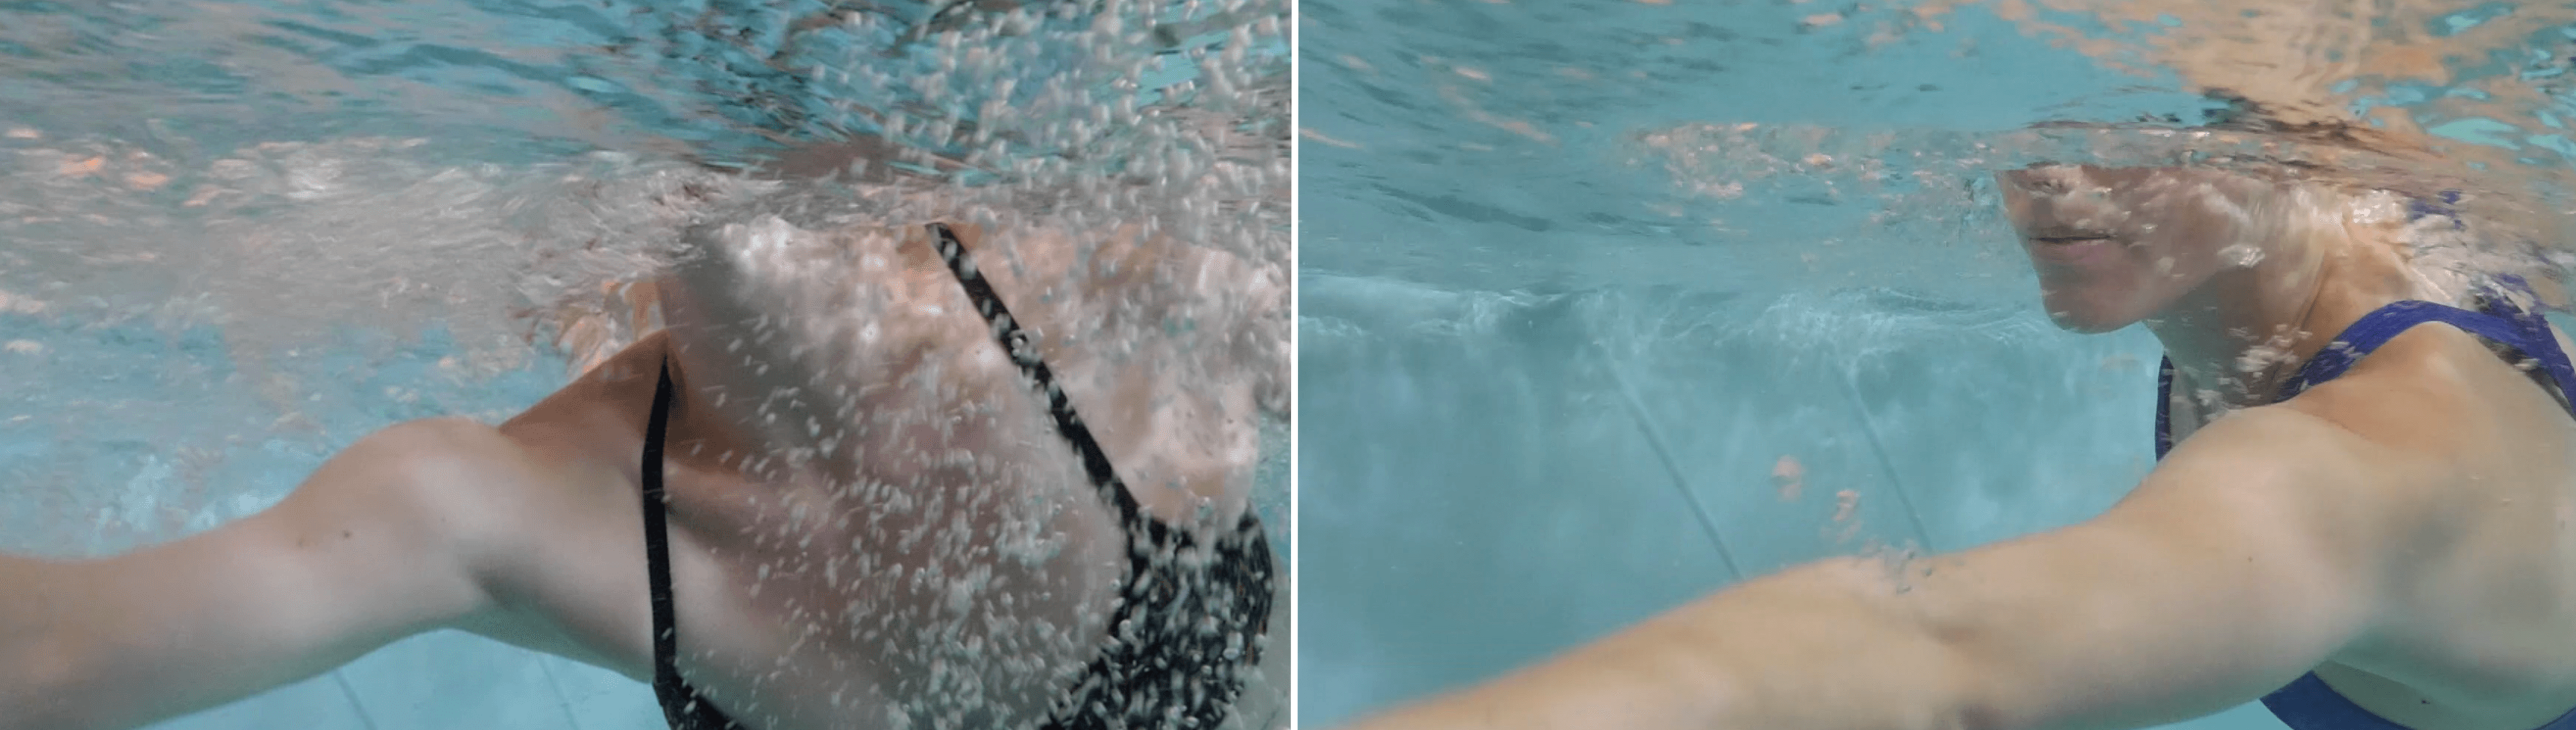 Two open-water swimming drills compared from underwater in the Performance Endless Pool at SwimBox in Fairfax Virginia